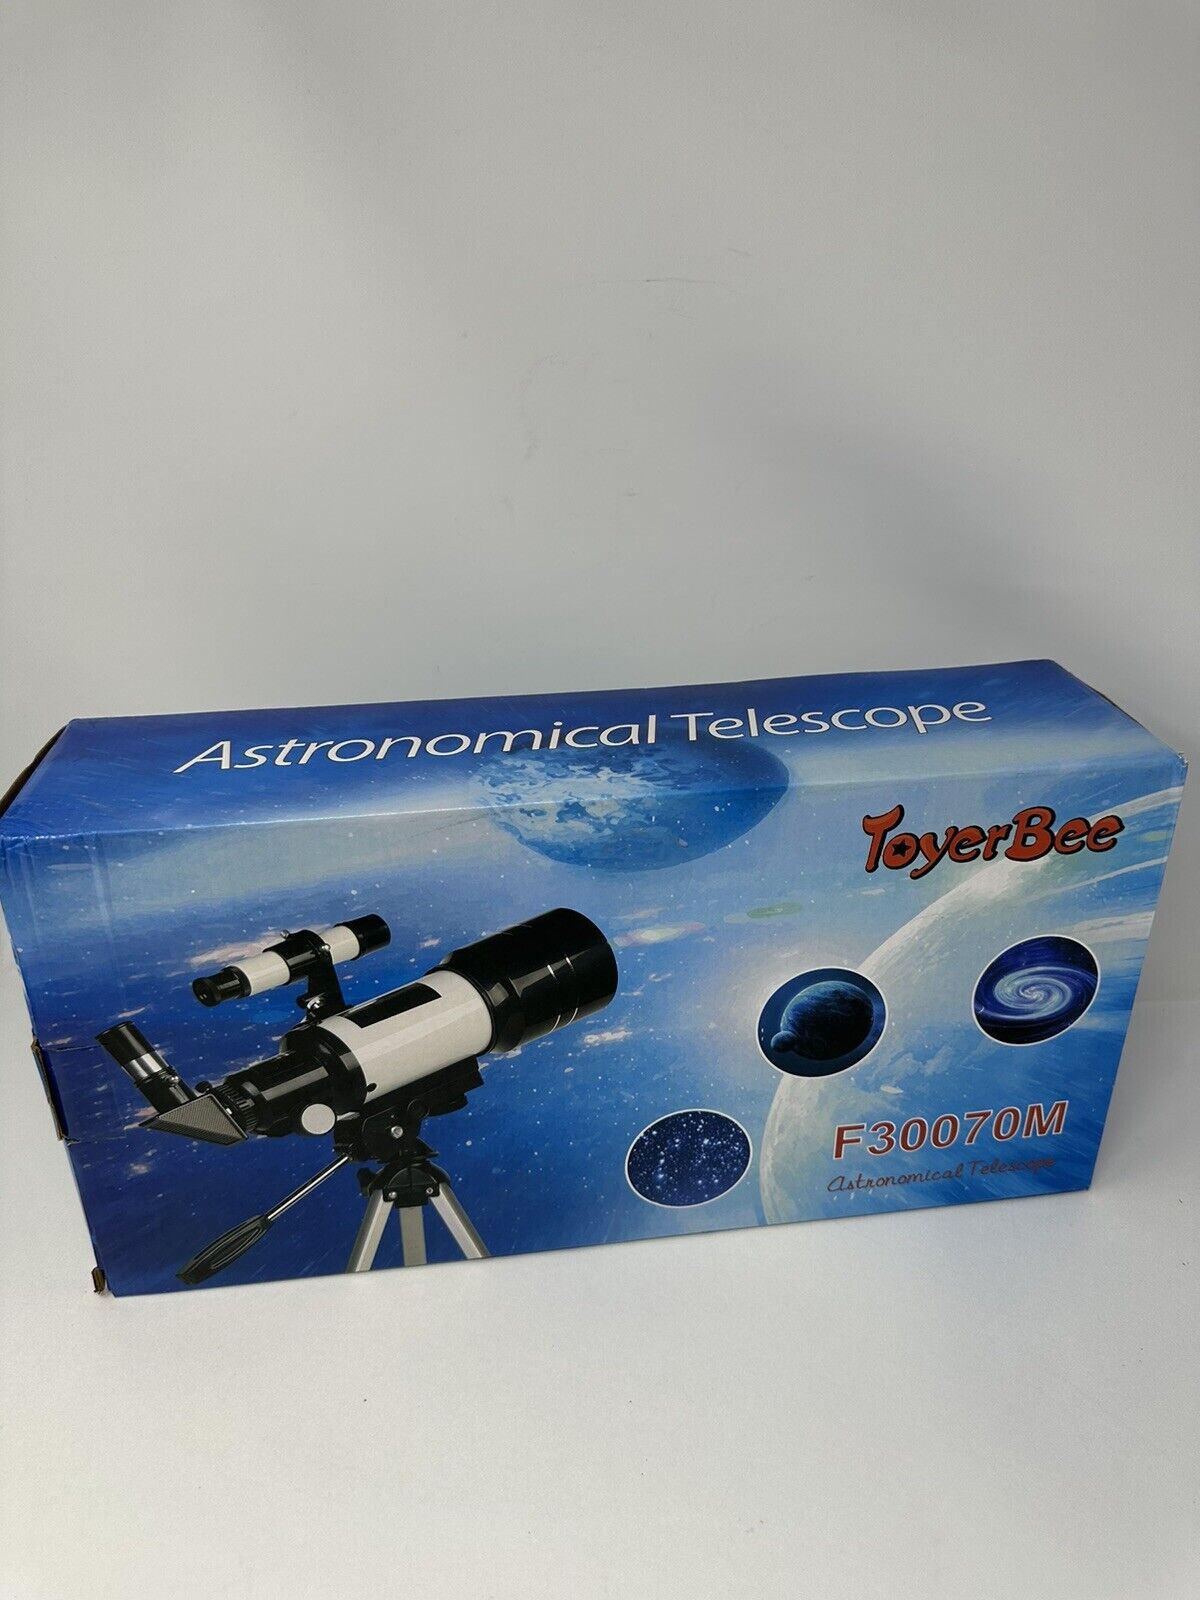 Outdoor Telescope F30070M HD - High Definition Astronomical W/Tripod ~ New